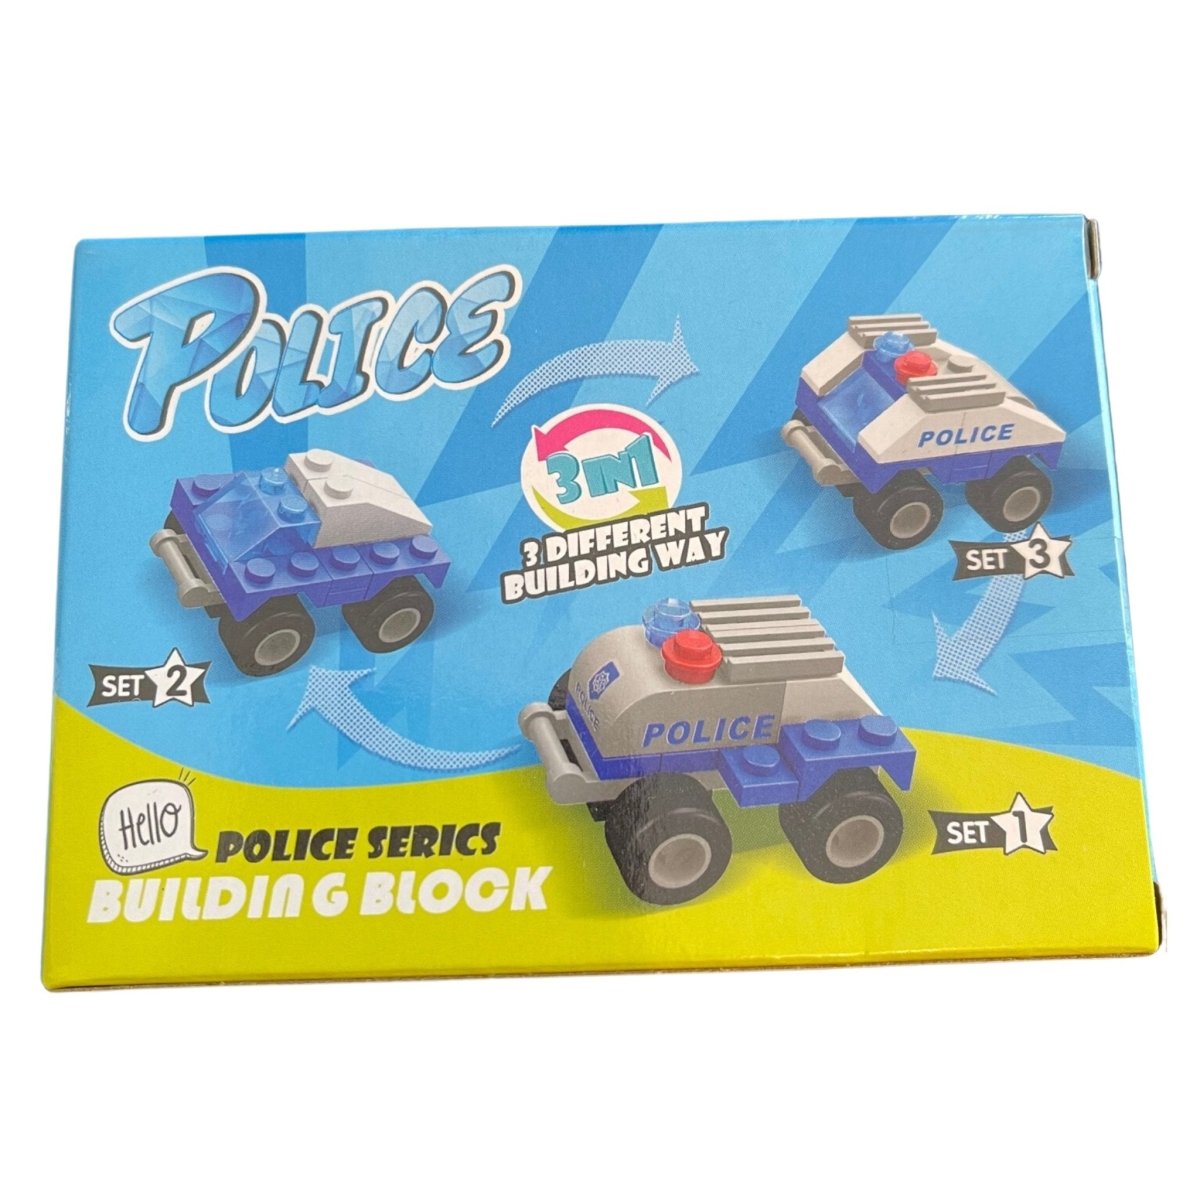 Police 3-in-1 Building Block Kit - Kids Party Craft